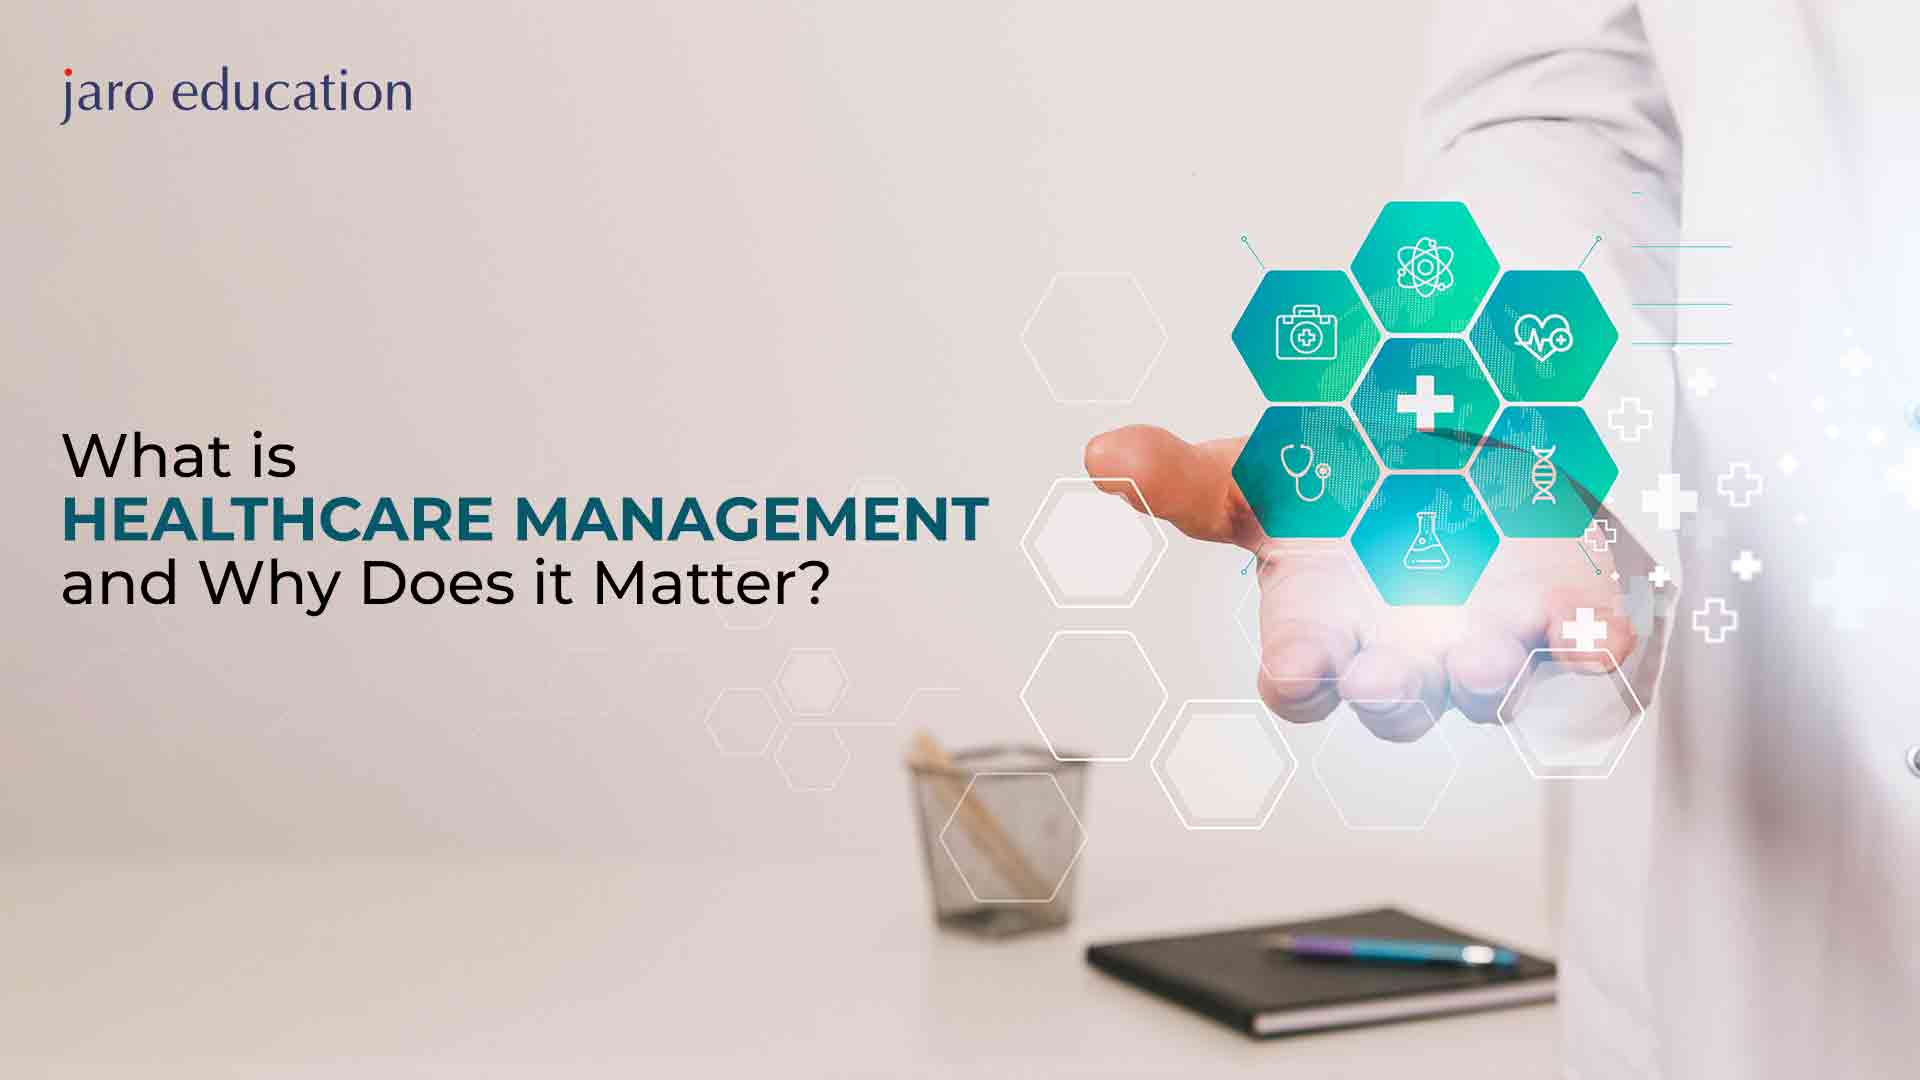 What is Healthcare Management and Why Does it Matter